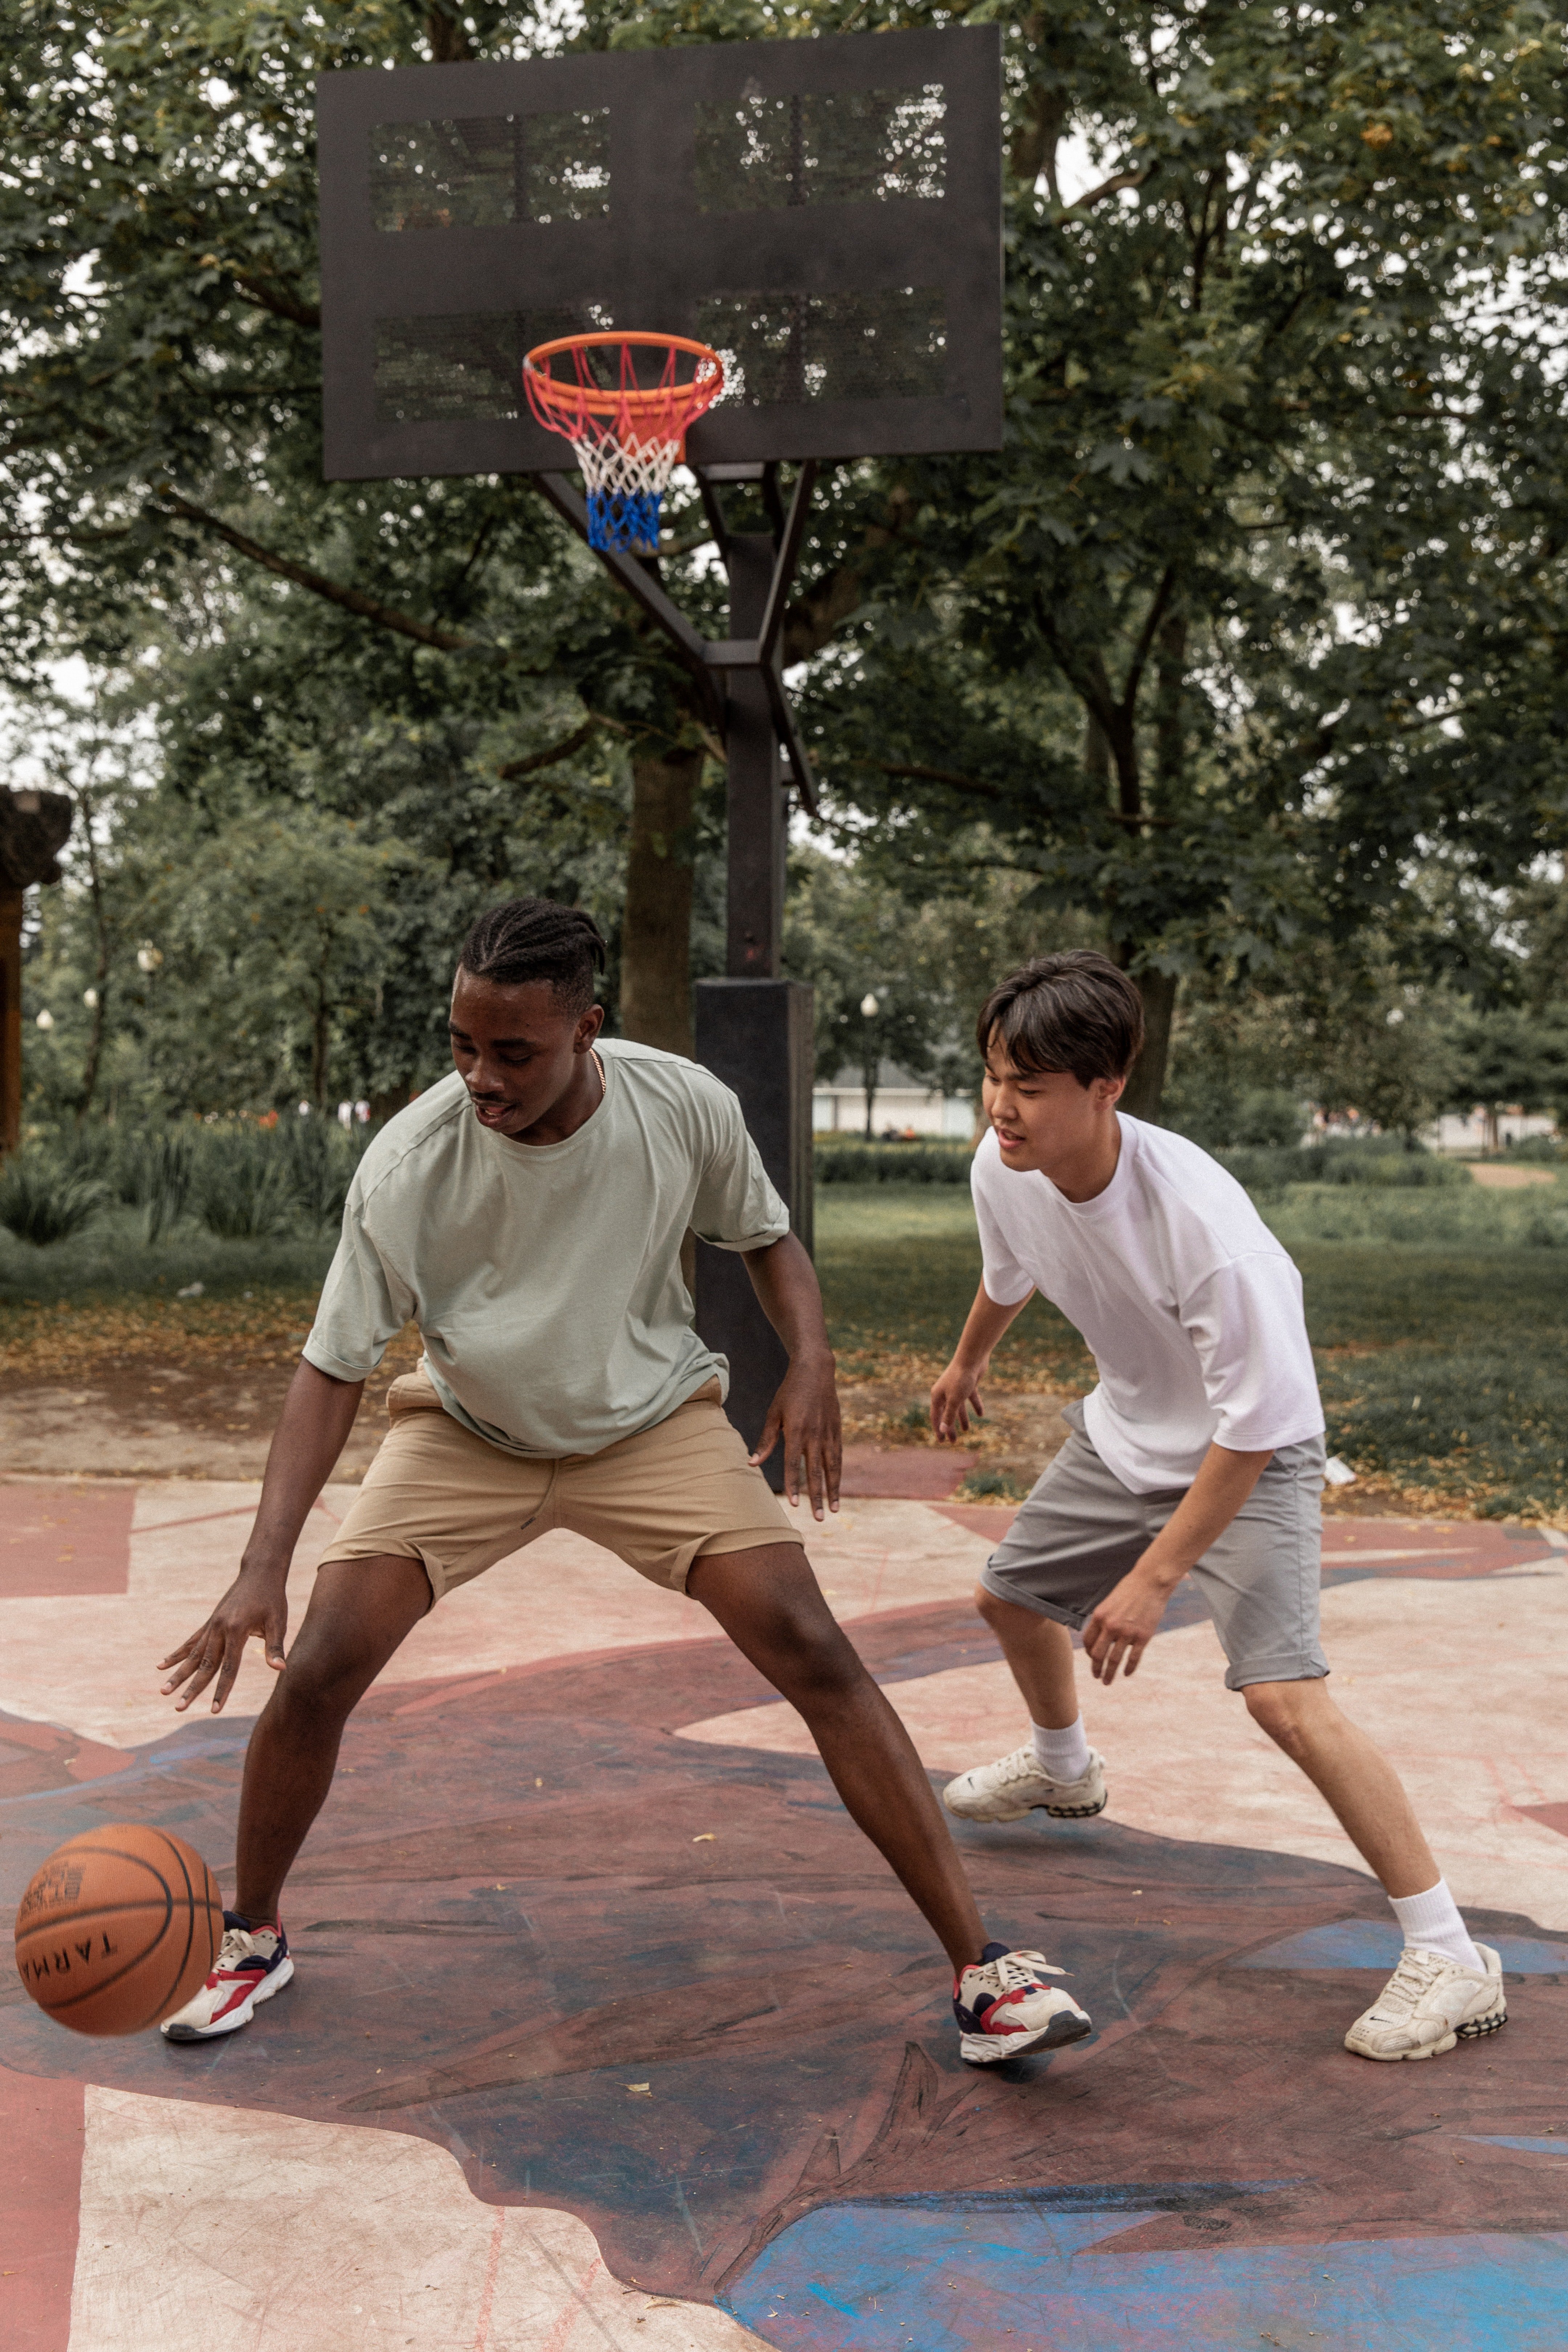 They went to the basketball court right down the street to play with Mia. | Source: Pexels